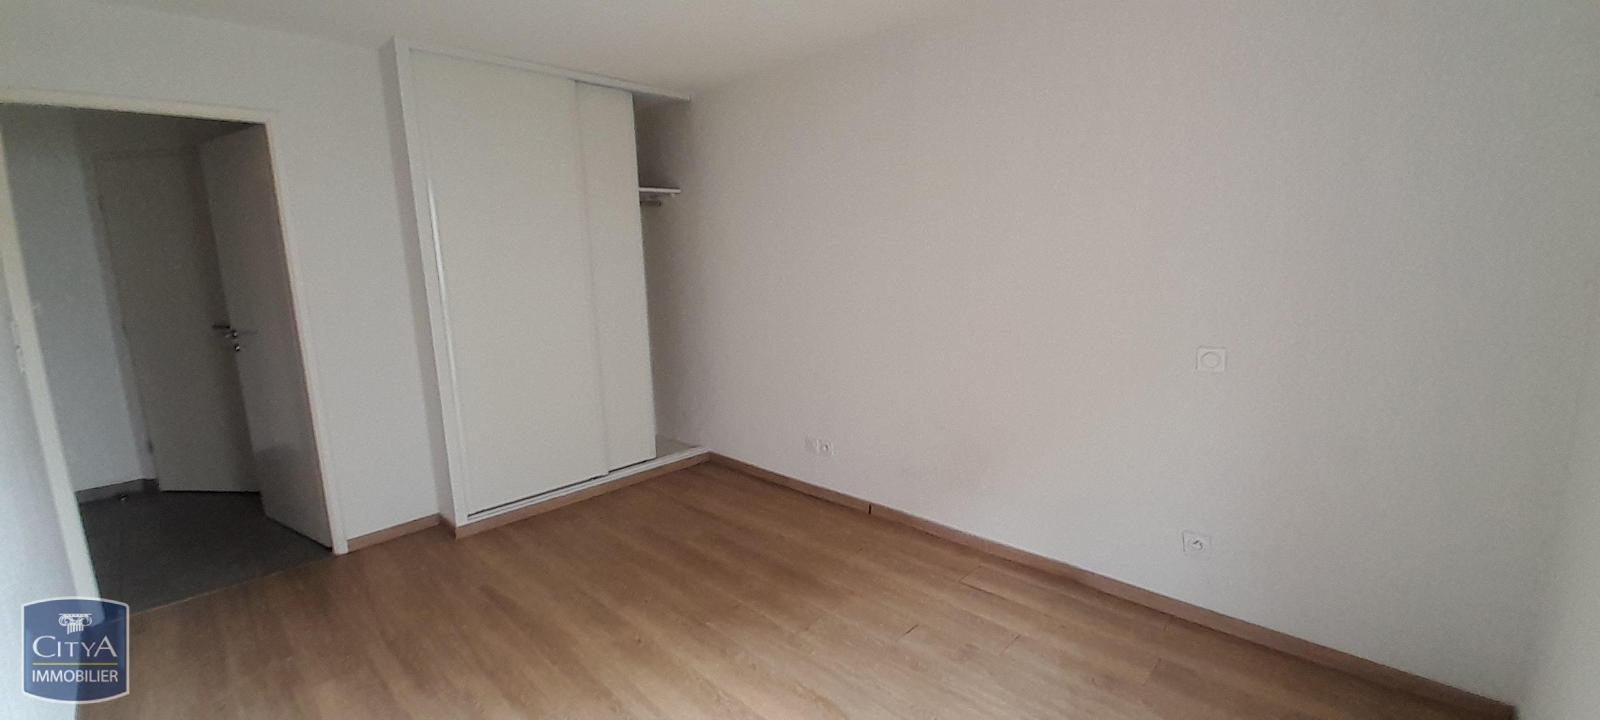 Photo 6 appartement Tournefeuille